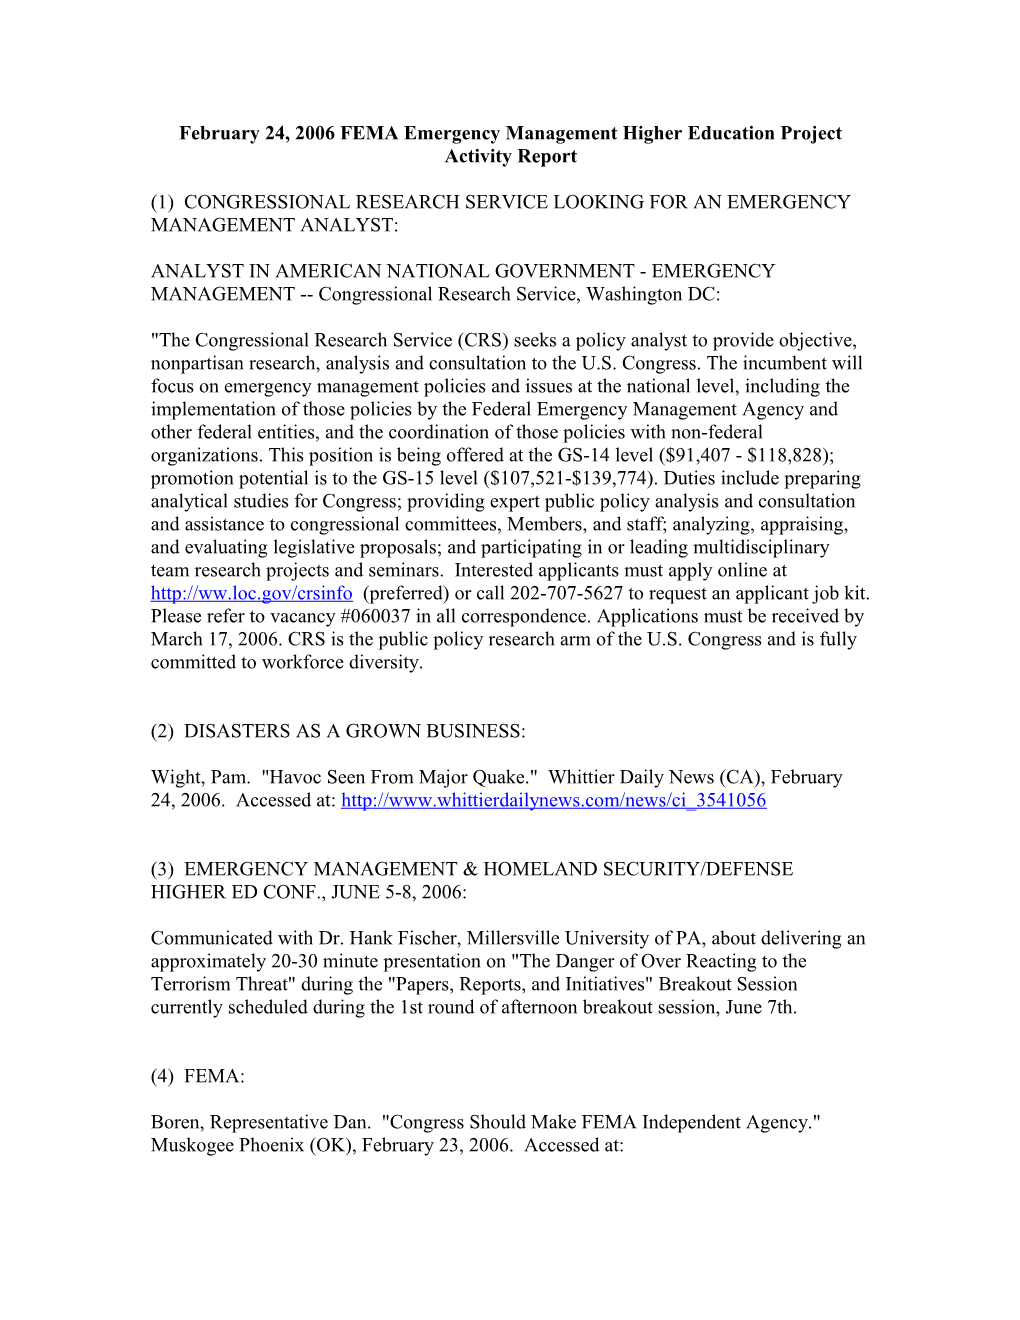 February 24, 2006 FEMA Emergency Management Higher Education Project Activity Report